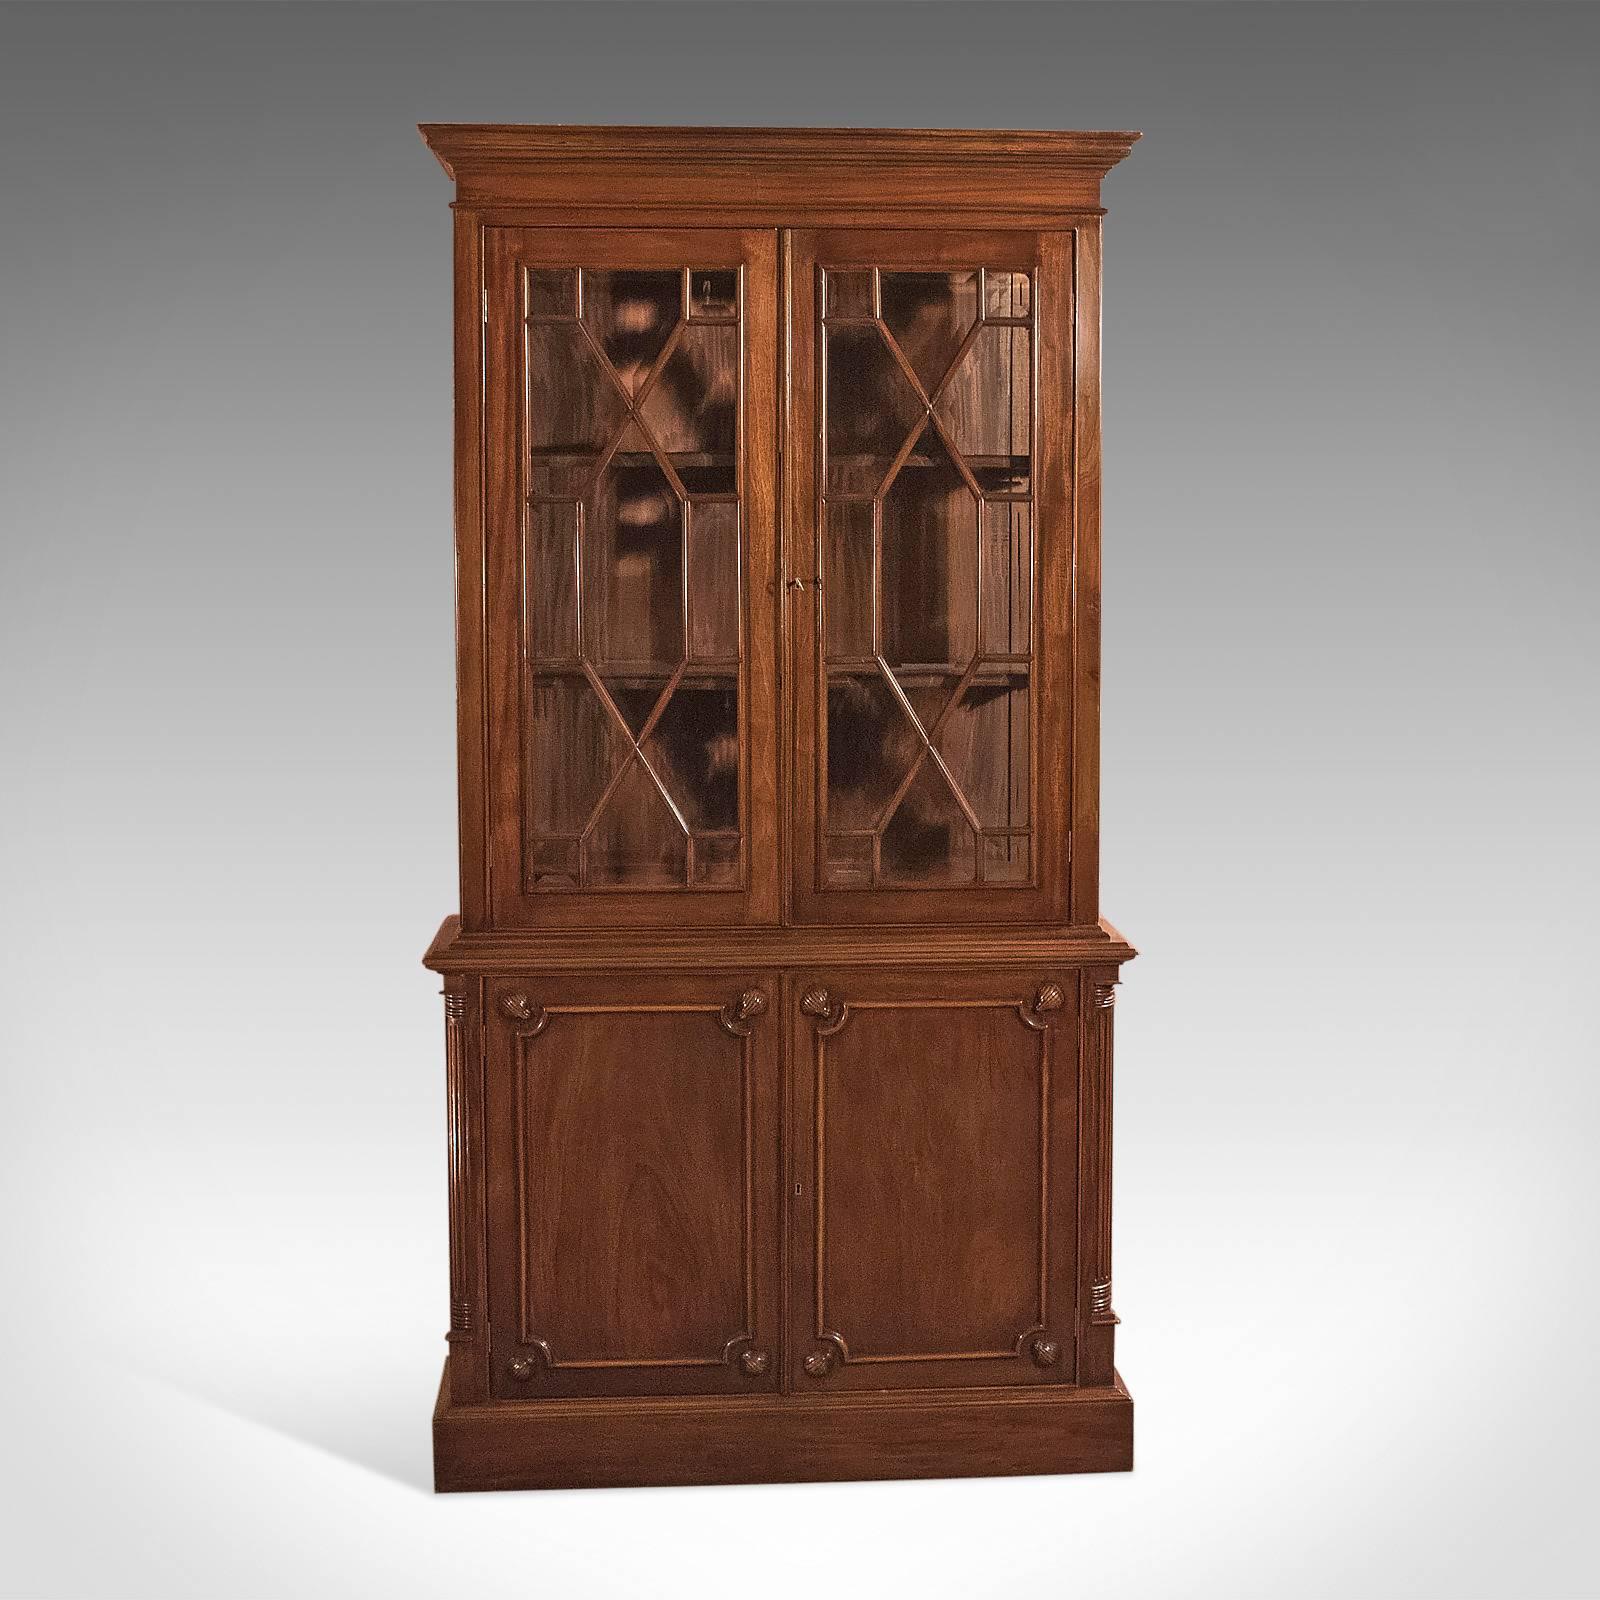 This is a bespoke mahogany bookcase cabinet in the Georgian taste.

Raised on a continues plinth with moulding finish
Two-door lower cabinet
Field panels with carved clam shell appliqué
Receded quarter column corner details
Single removable